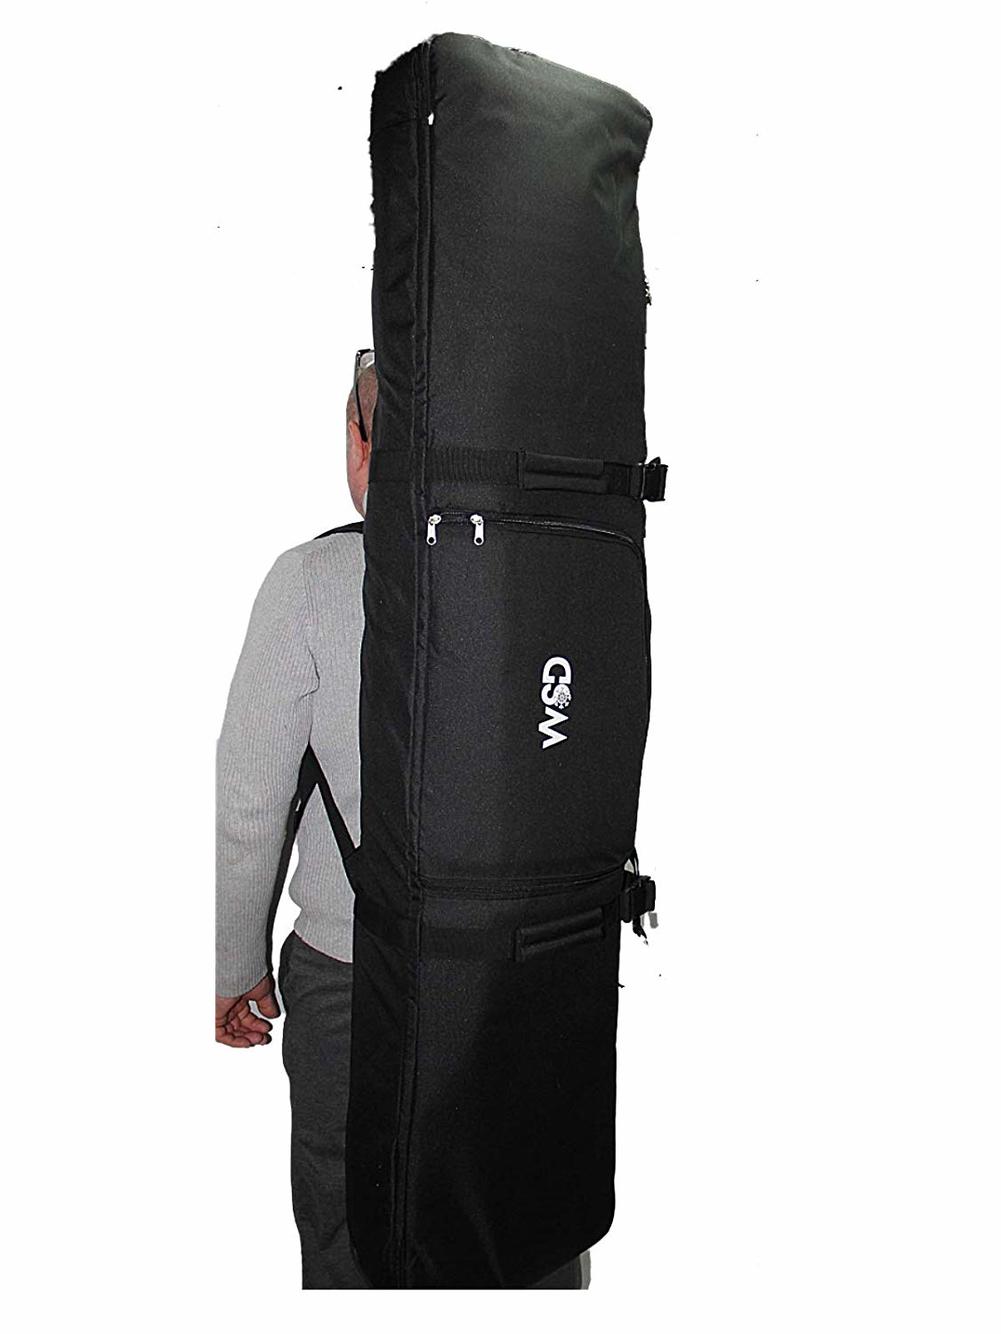 Fully Padded Travel Snowboard Bag with WHEELS 